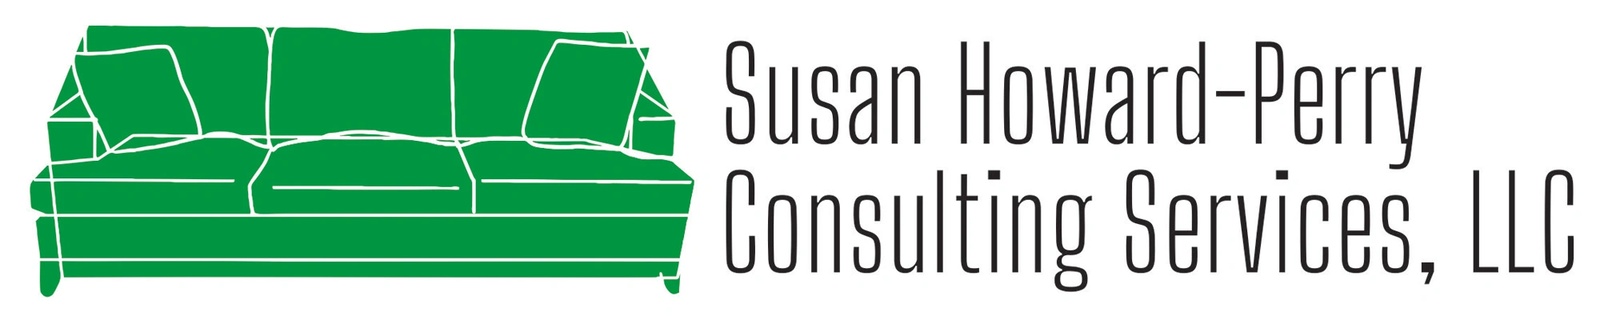 Susan Howard-Perry Consulting Services, LLC